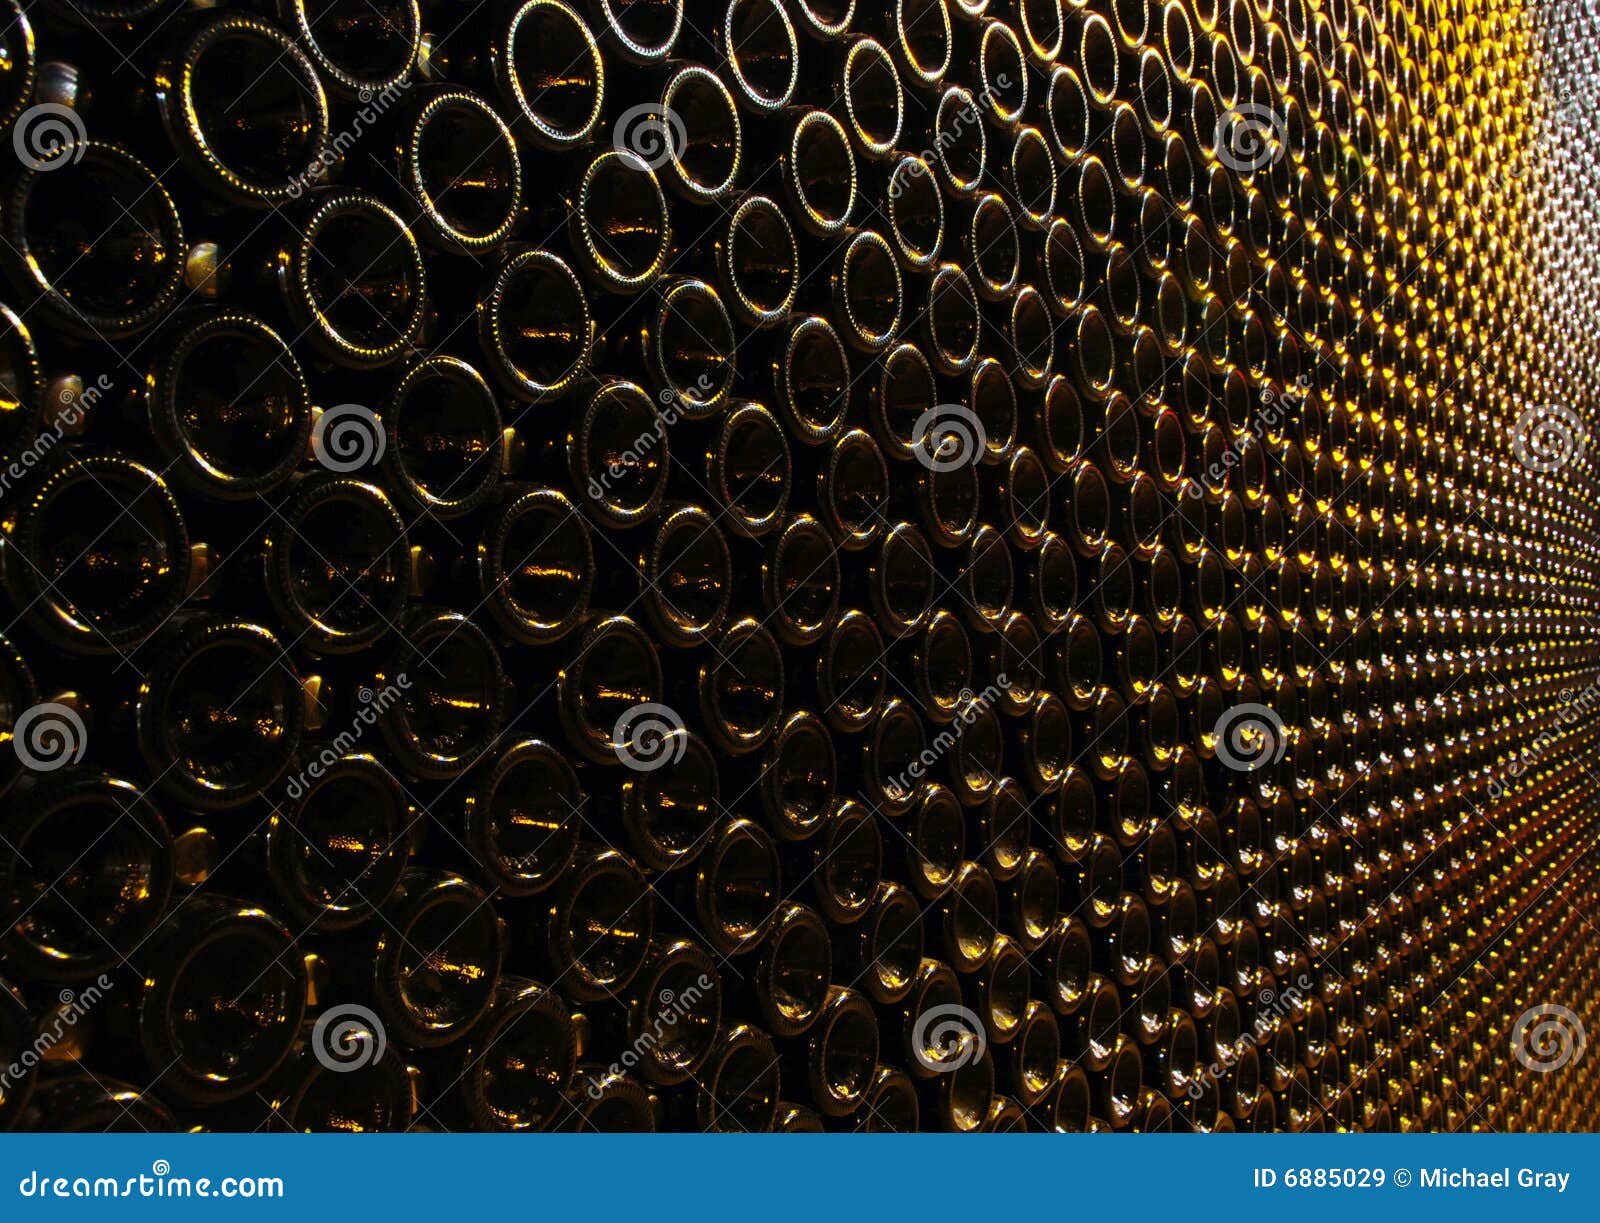 lots of wine bottles stacked